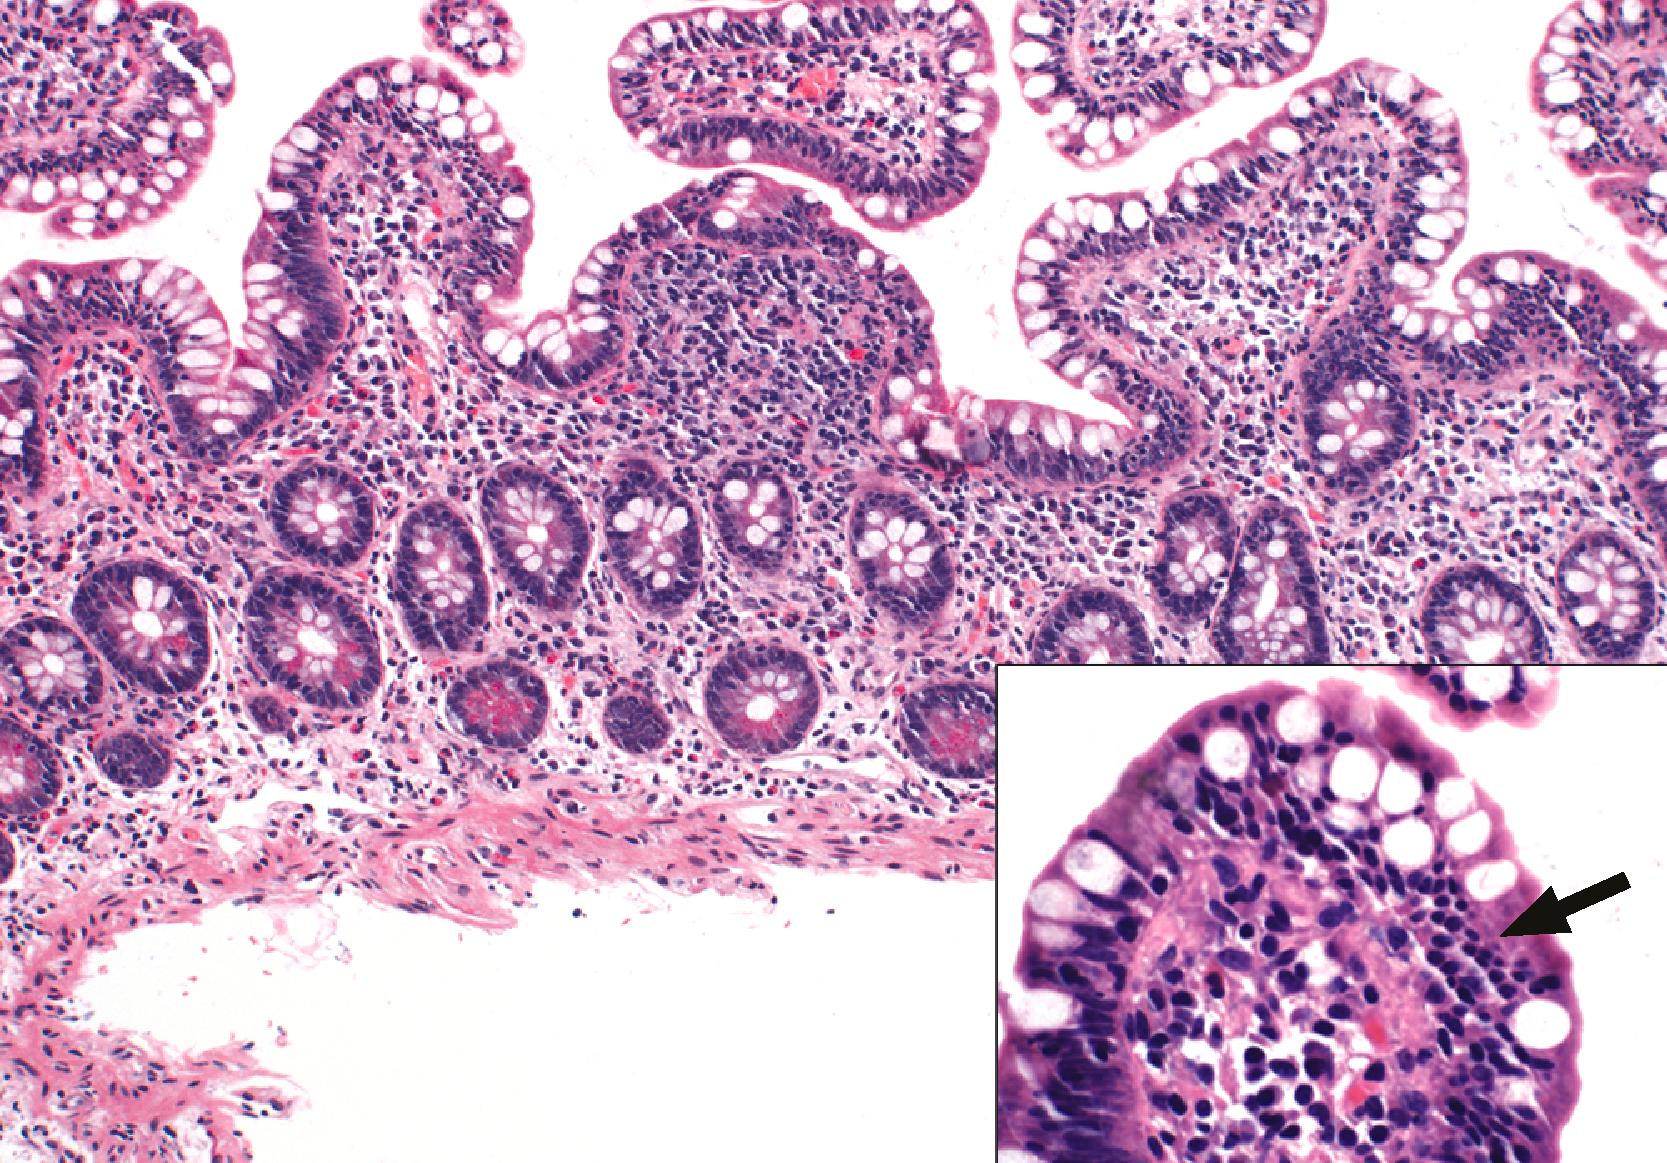 FIGURE 16.6, Viral gastroenteritis. This biopsy specimen from the second duodenum reveals mild villous blunting and a marked increase in the number of intraepithelial lymphocytes (arrow in inset). Viral studies revealed acute infection with rotavirus in this patient, who recovered spontaneously.